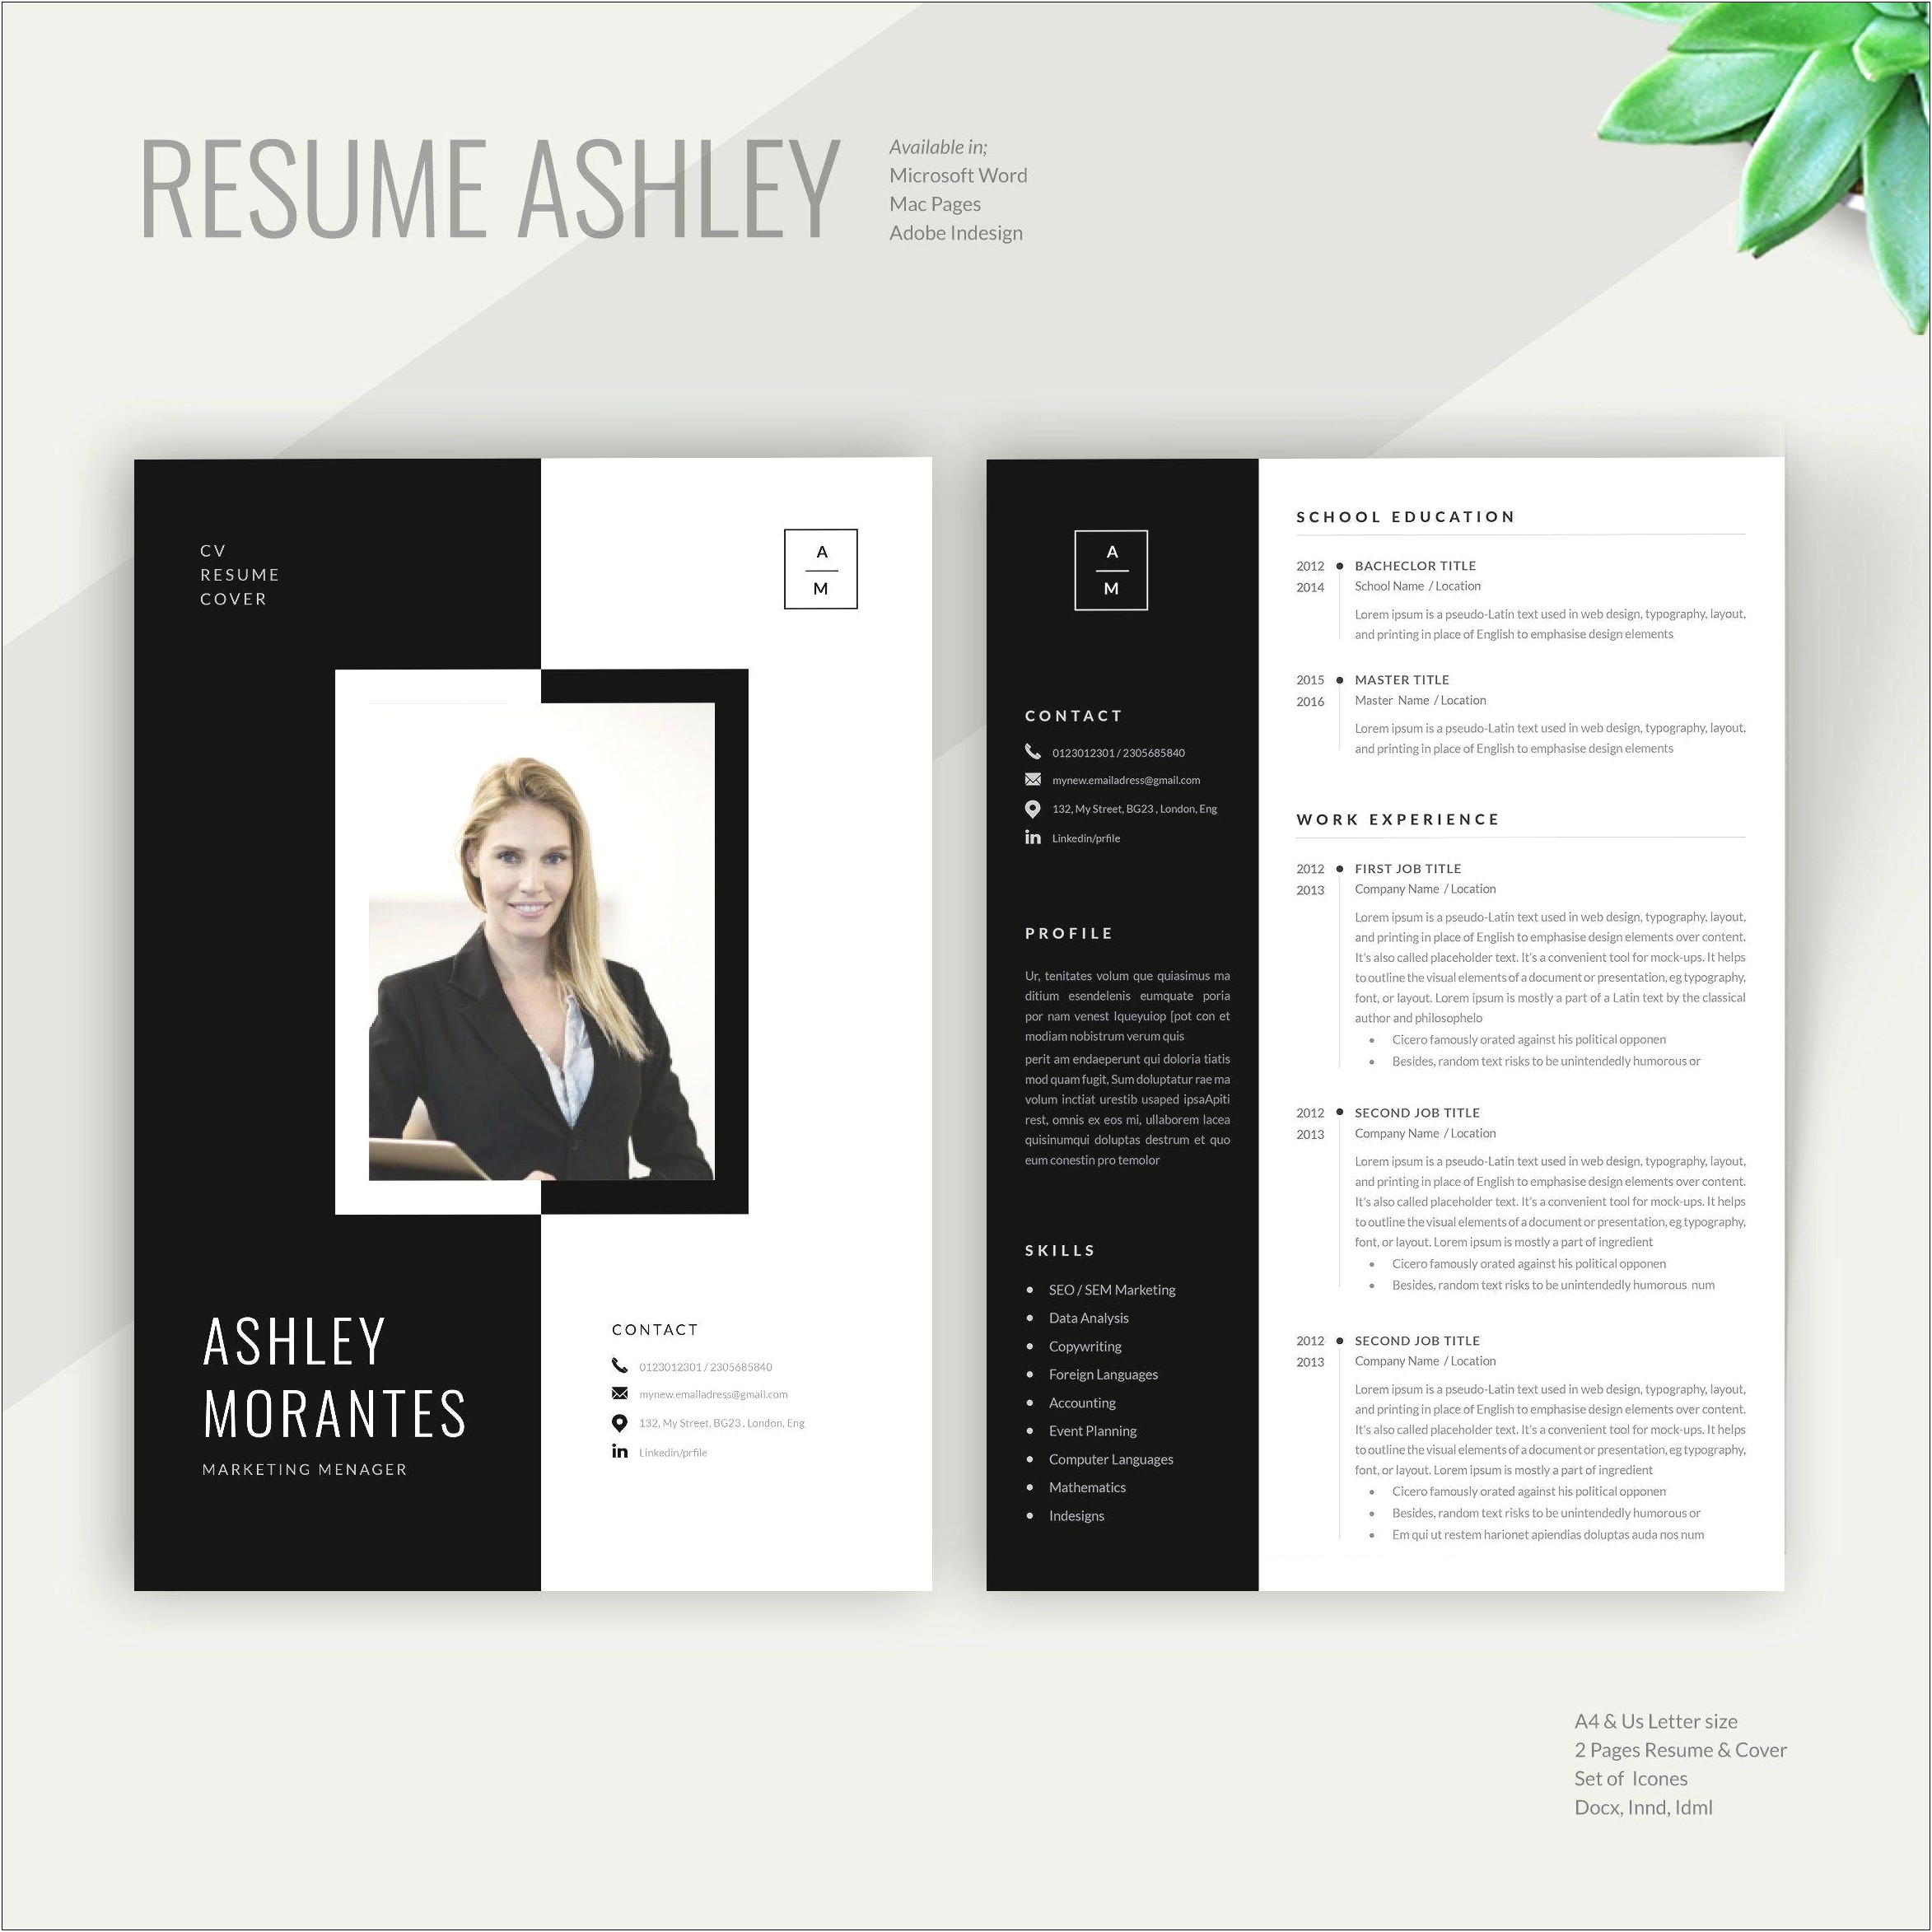 Can I Reference Resume On Cover Letter